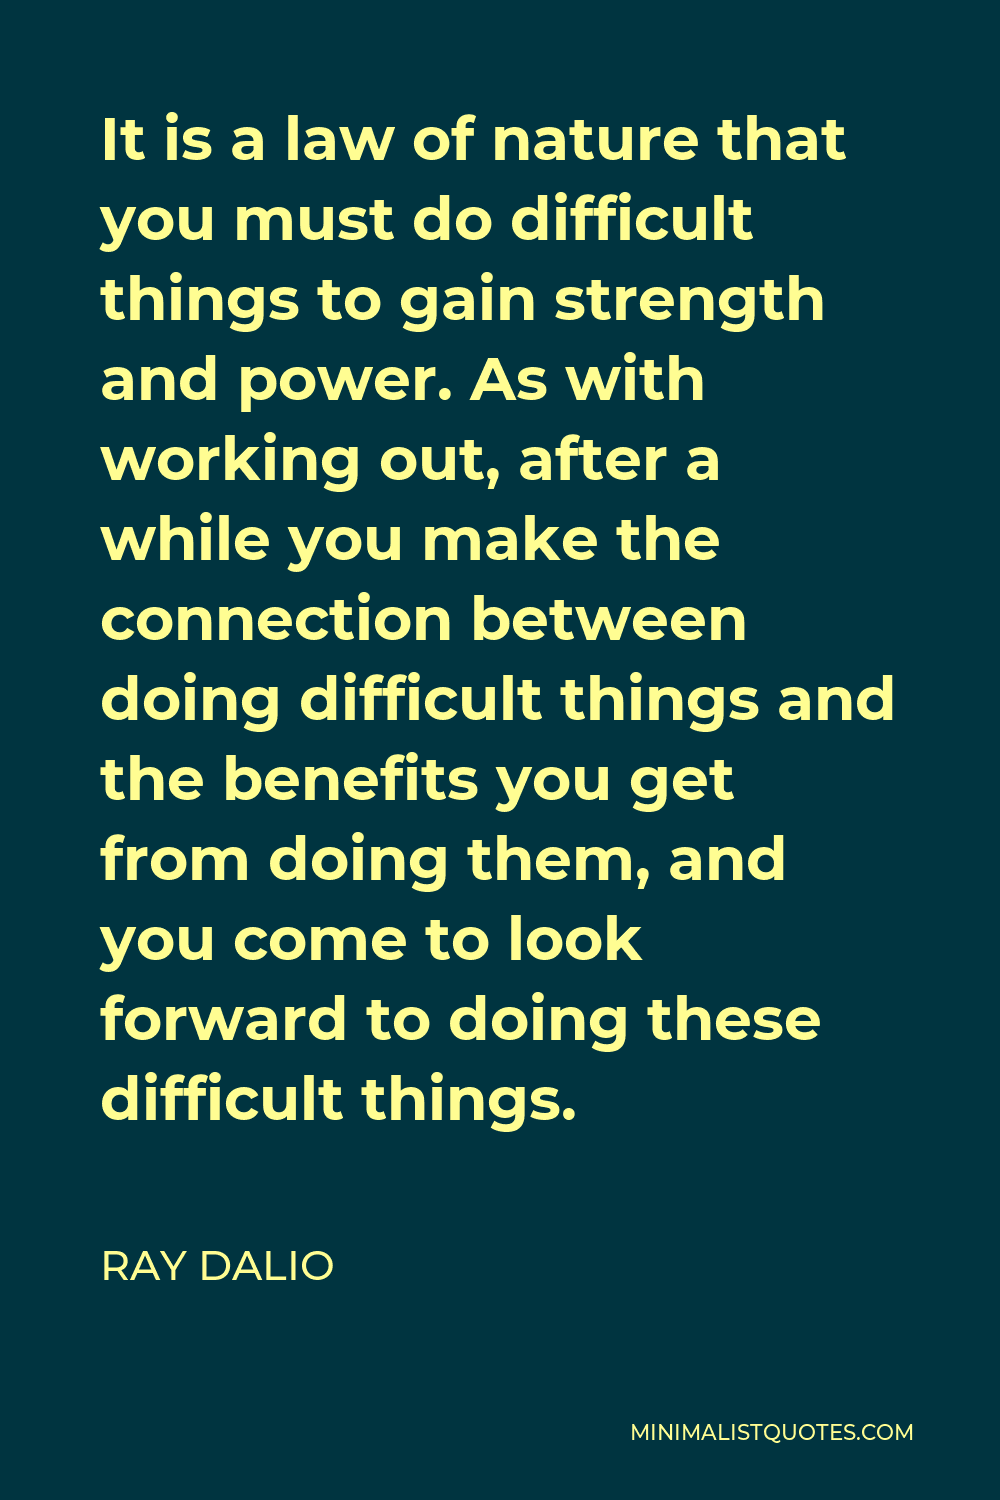 Ray Dalio Quote - It is a law of nature that you must do difficult things to gain strength and power. As with working out, after a while you make the connection between doing difficult things and the benefits you get from doing them, and you come to look forward to doing these difficult things.